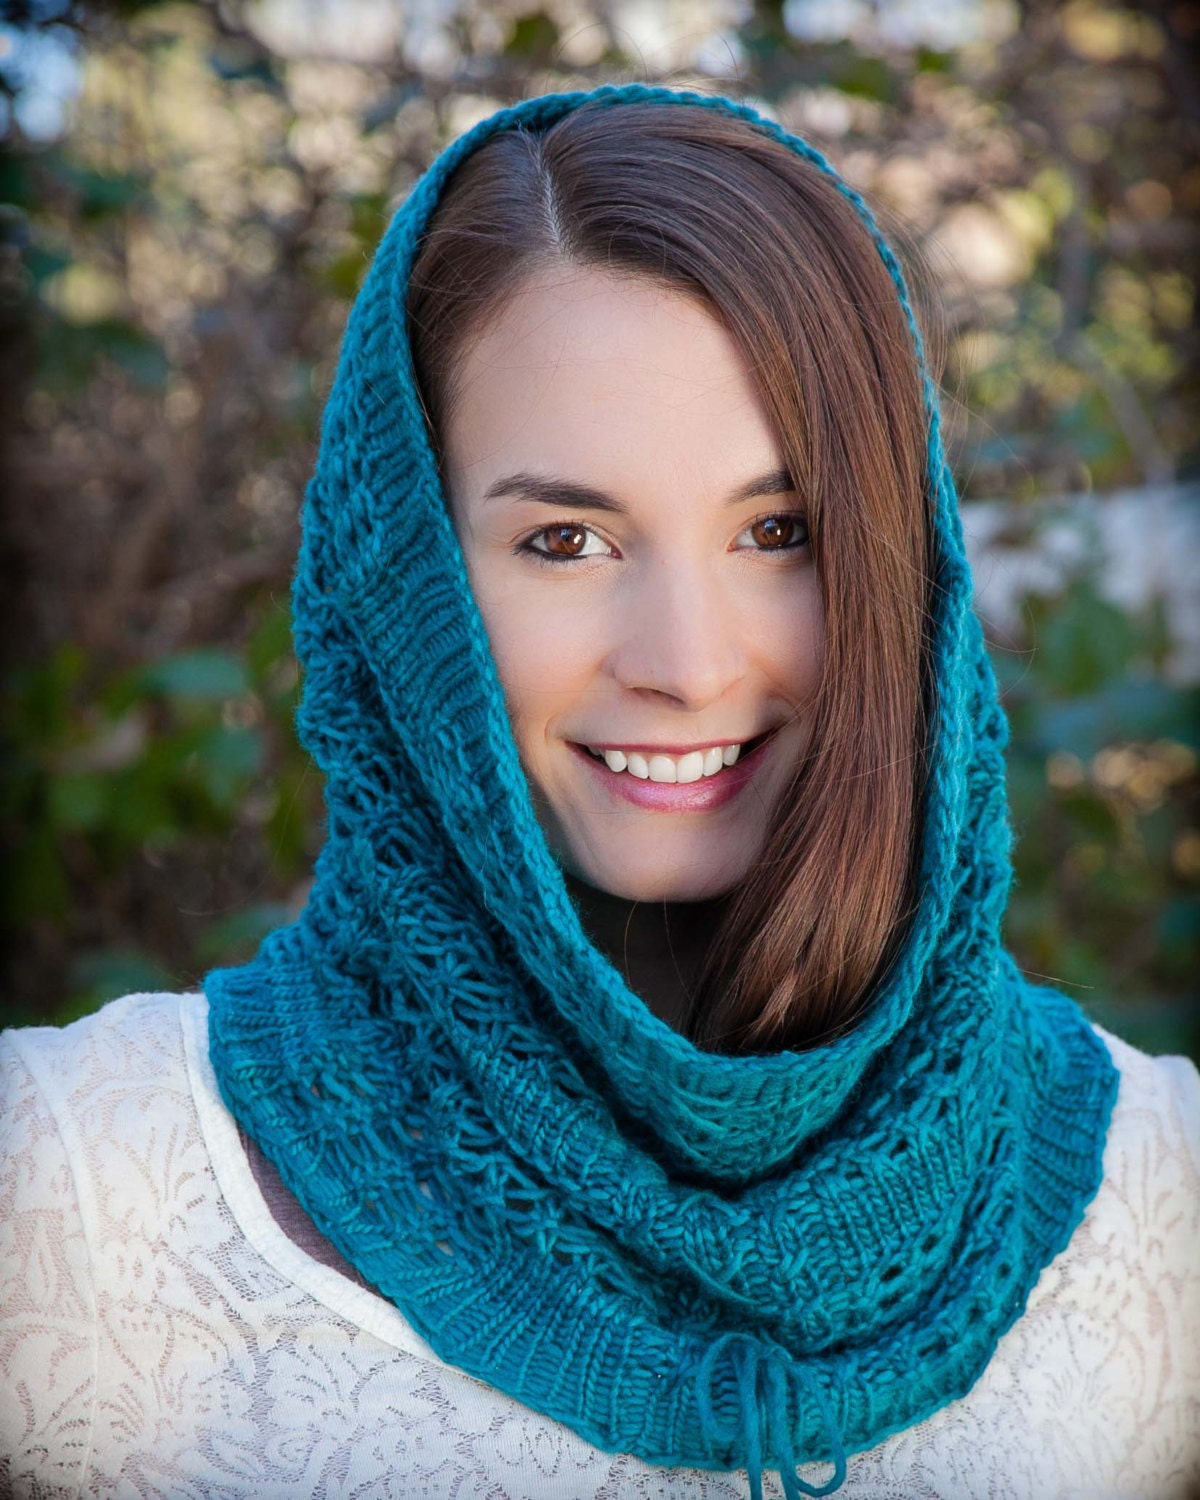 Loom Knit Snood Cowl PATTERN. Lace Snood, Infinity Scarf ...